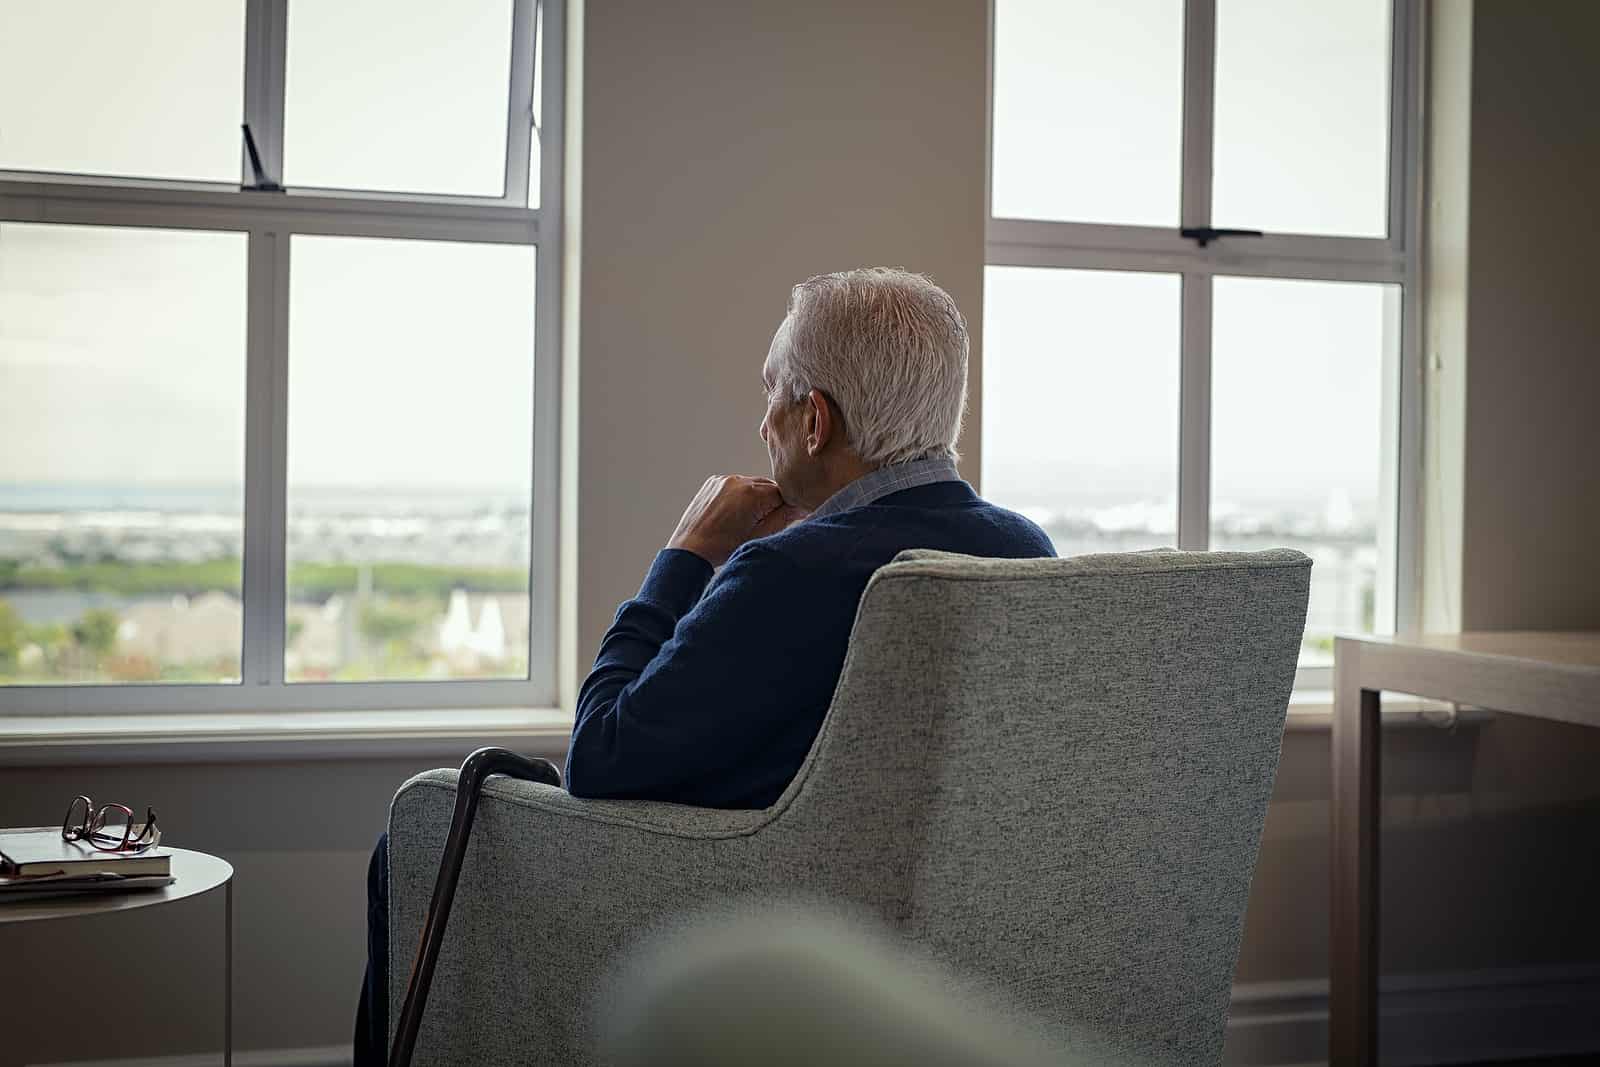 Senior Isolation and Loneliness